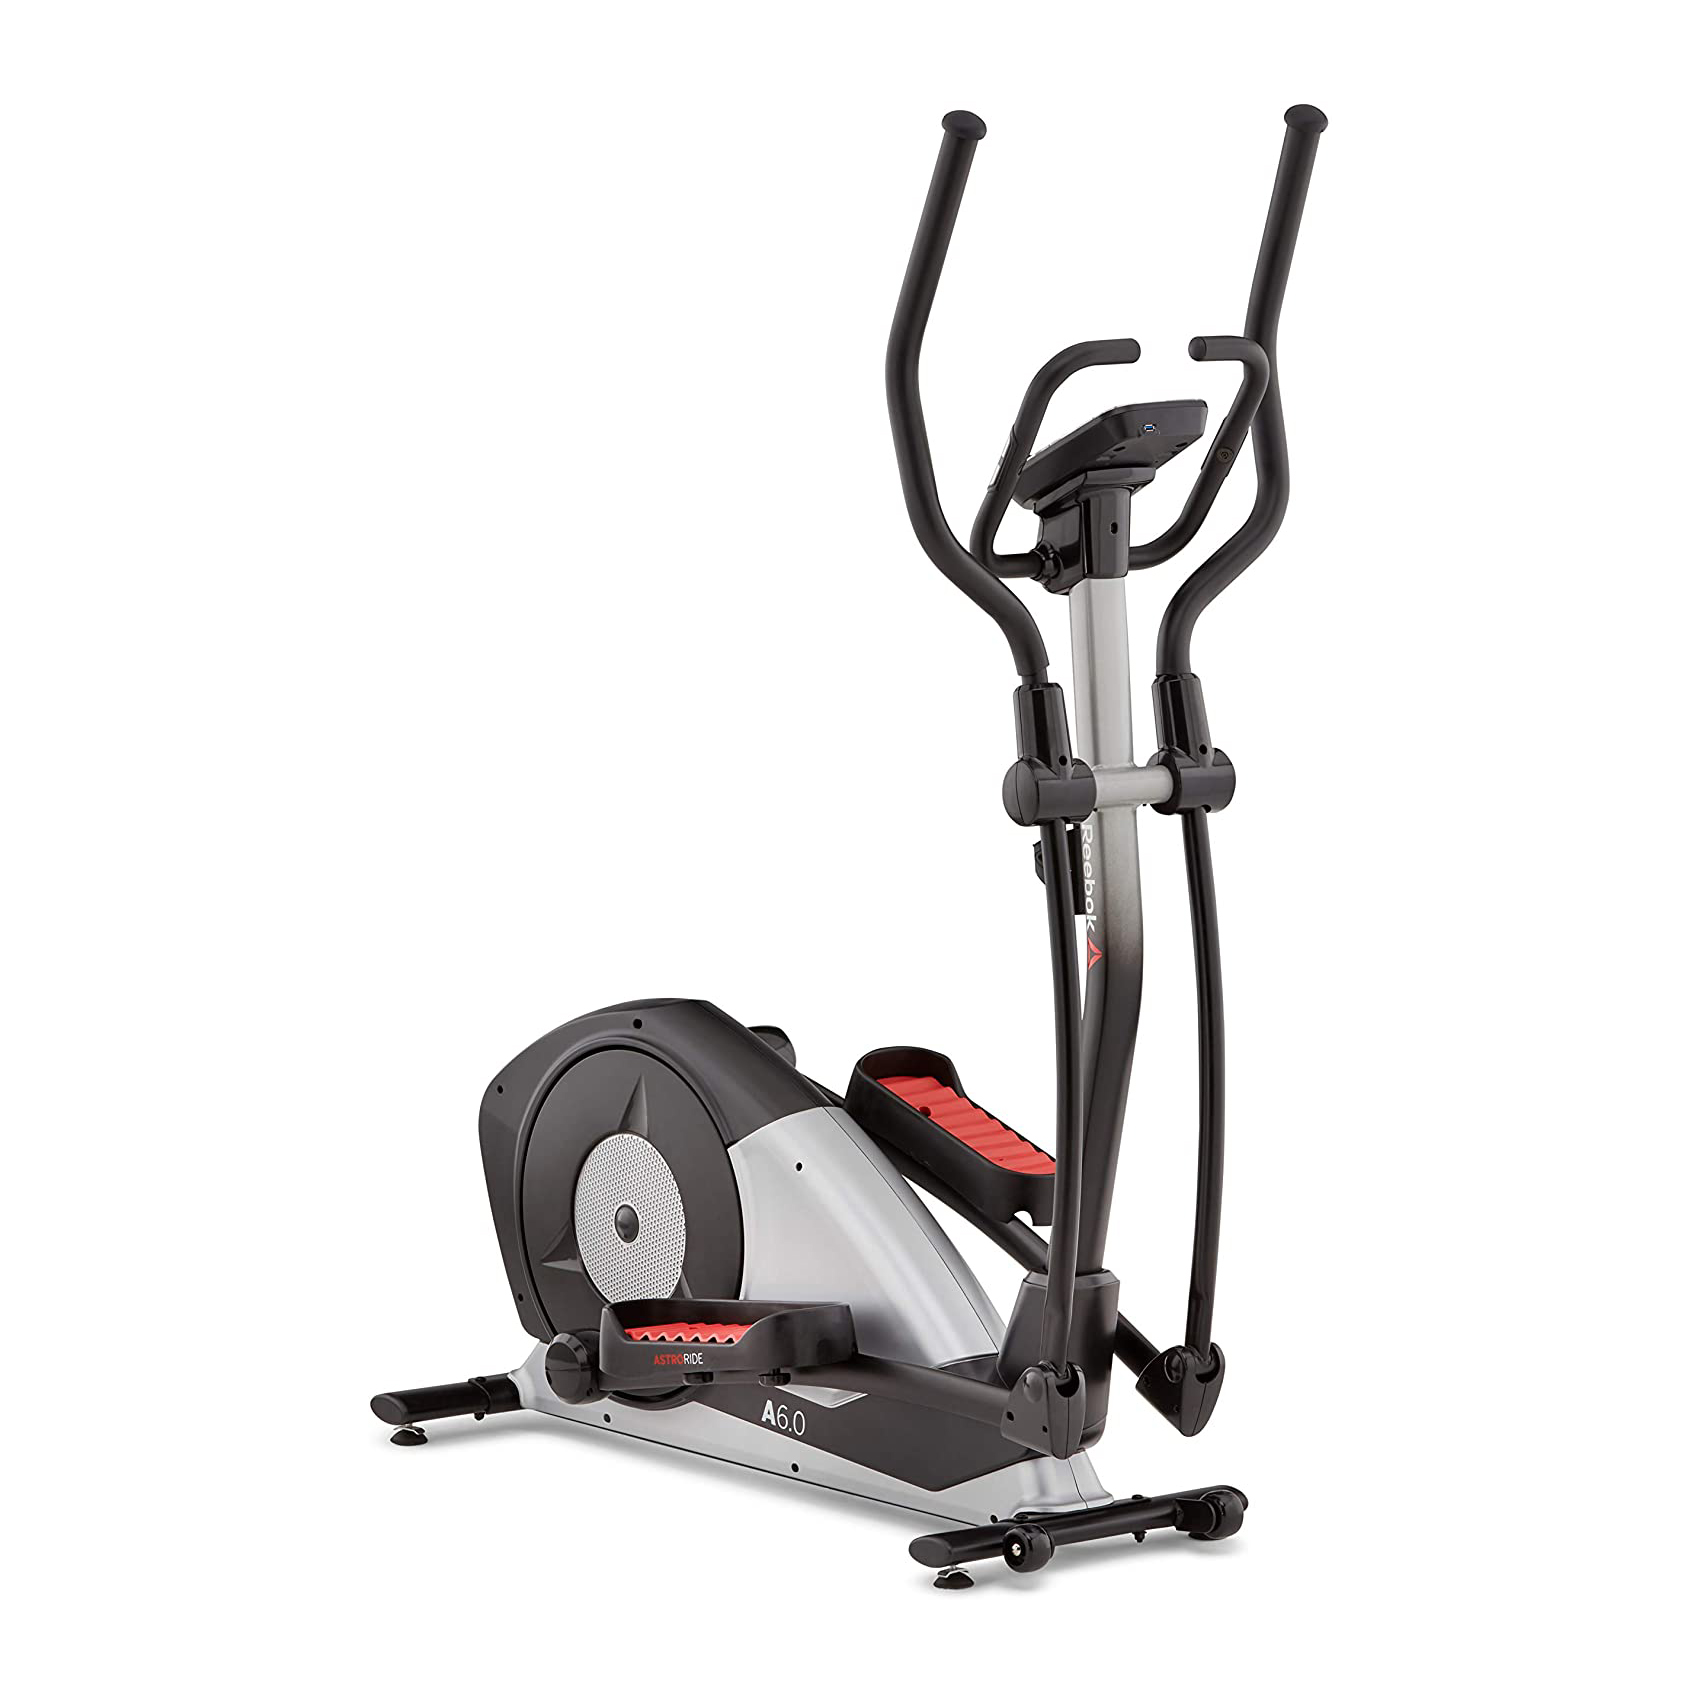 Cyberplads et eller andet sted Hearty Buy Reebok Fitness A6.0 Cross Trainer + Bluetooth - Silver Online at Best  Price in UAE.